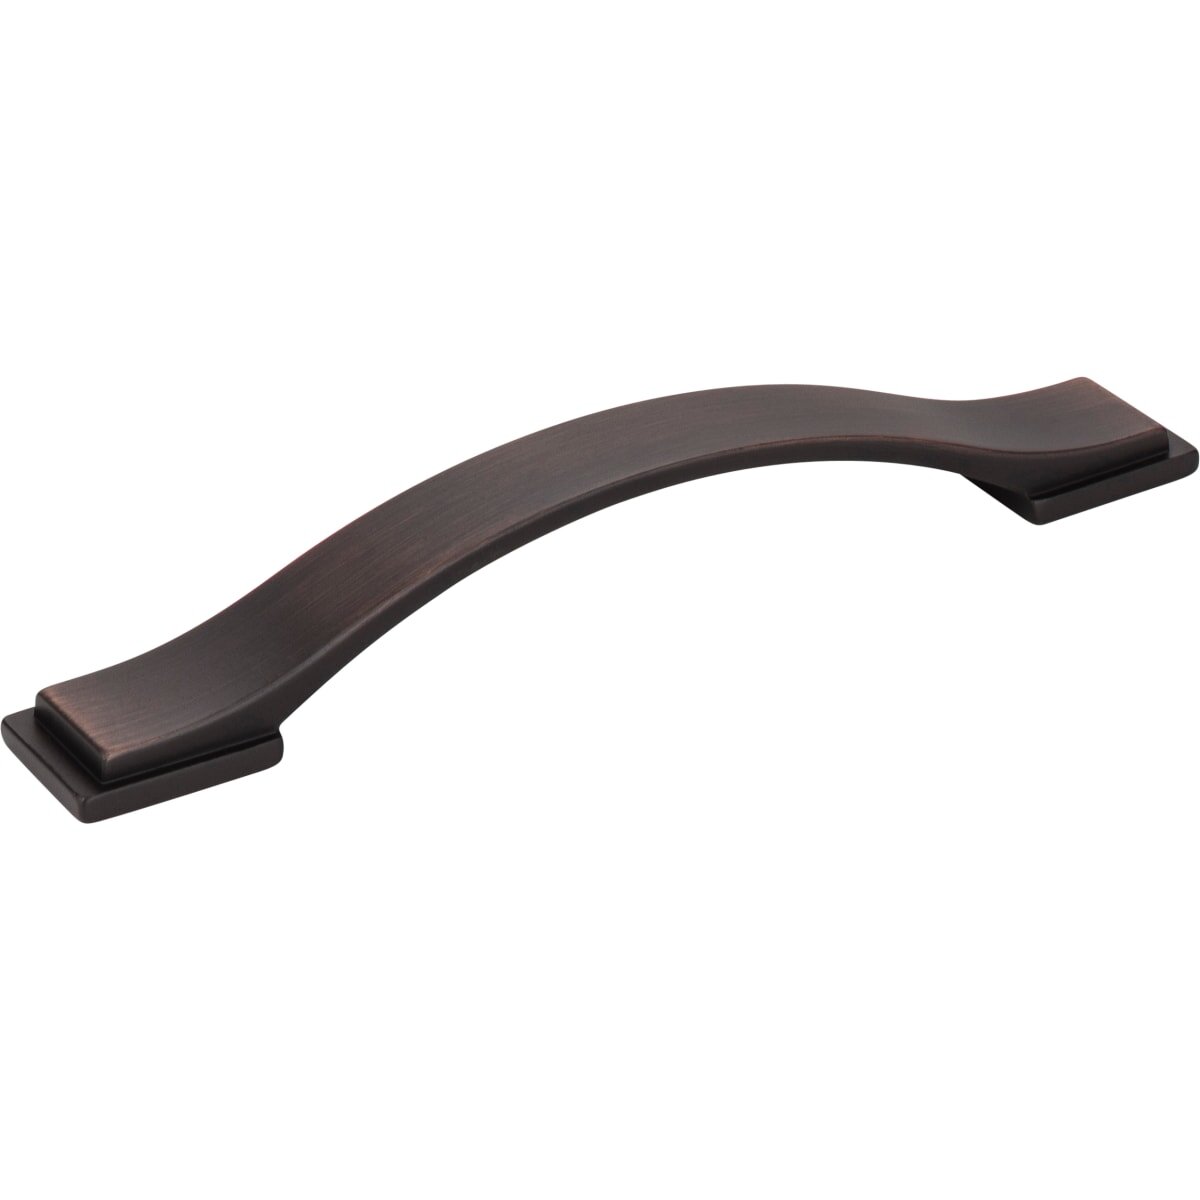 Mirada Brushed oil rubbed bronze